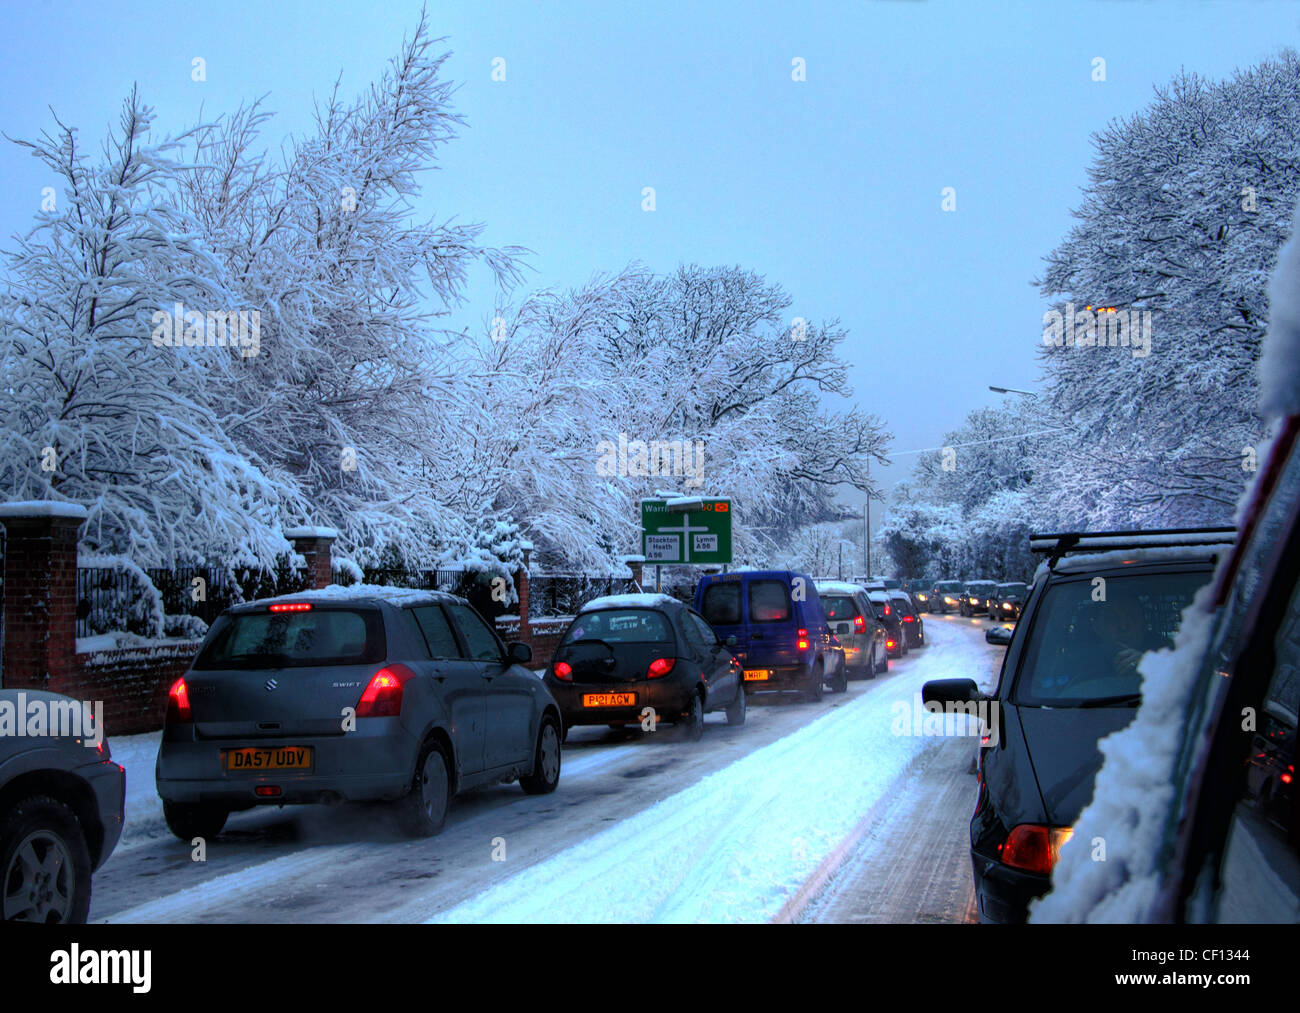 A50 traffic jam, on A50 Knutsford road, close to Grappenhall, Warrington, Cheshire, England UK Stock Photo